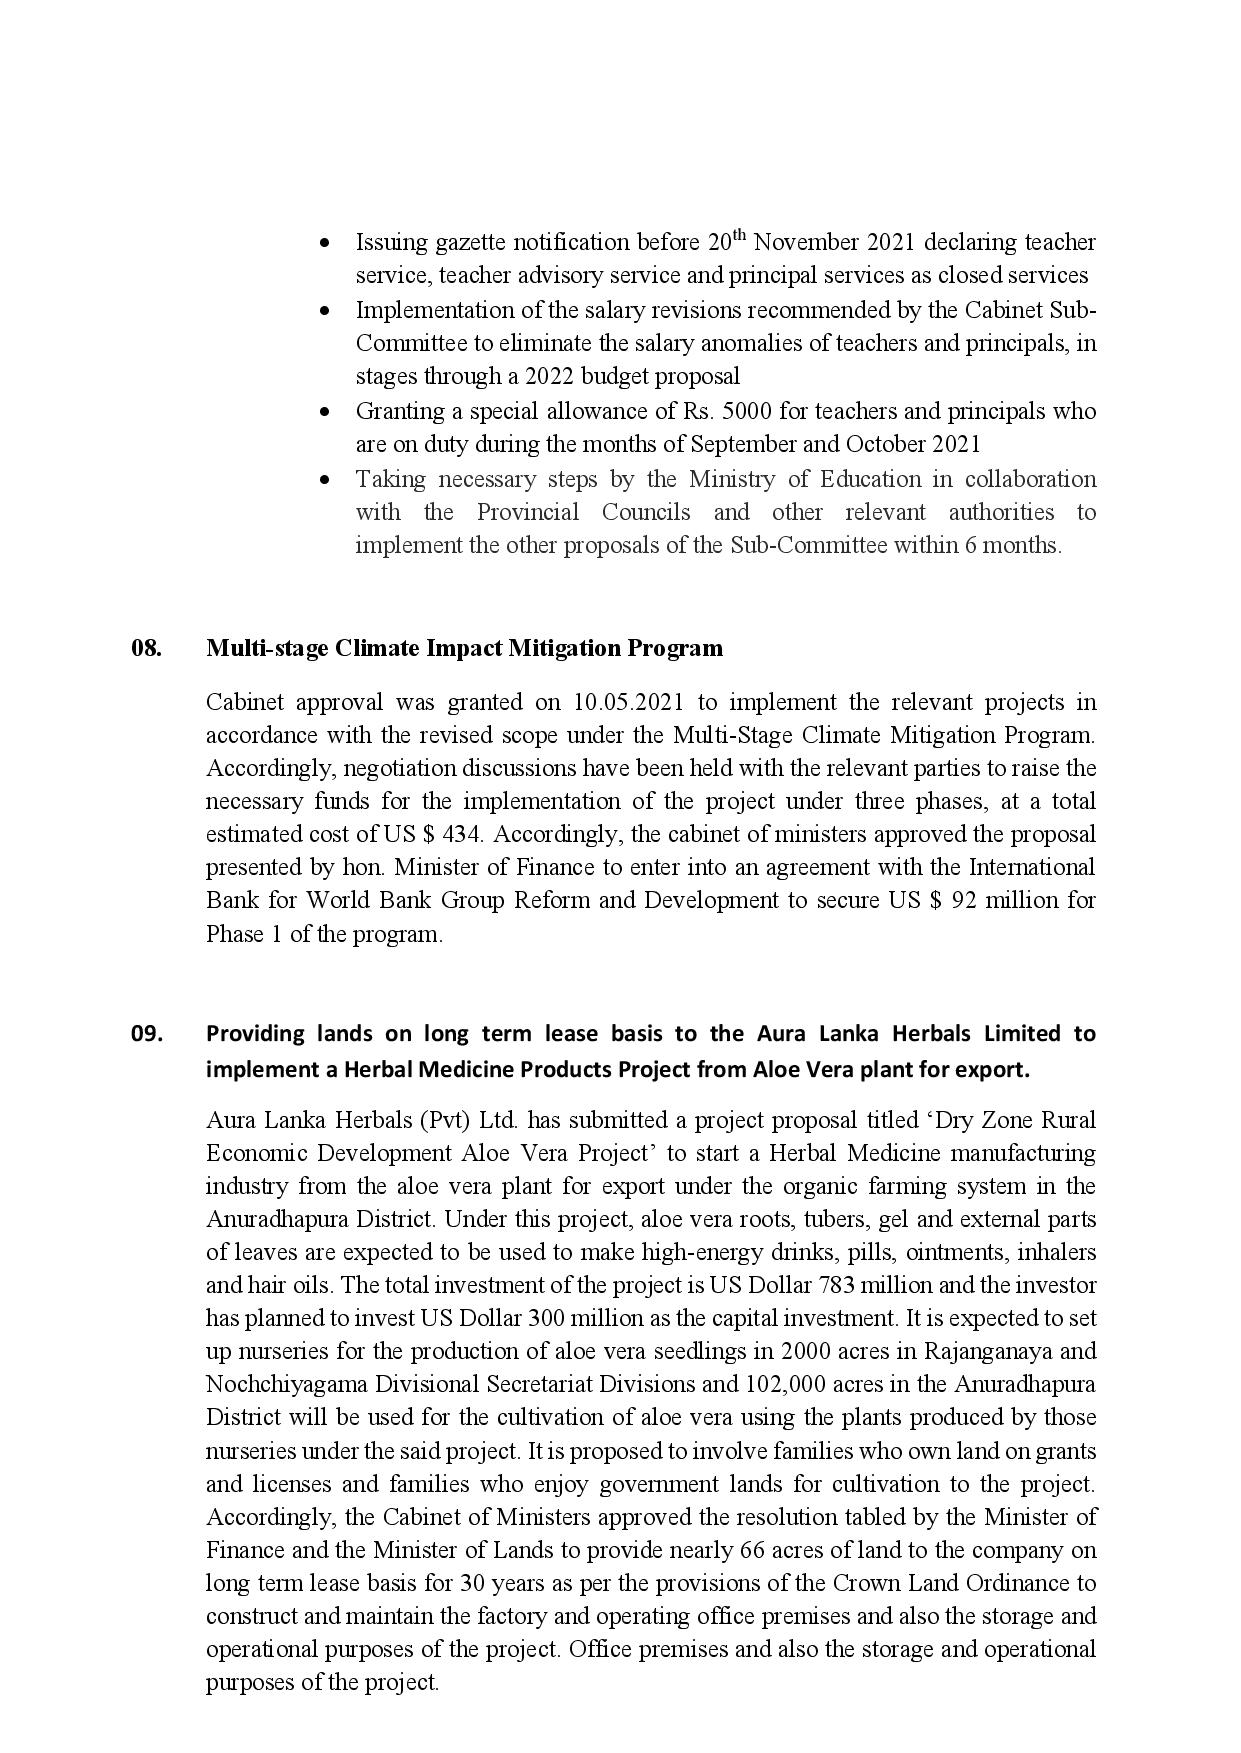 Cabinet Decision on 30.08.2021English page 003